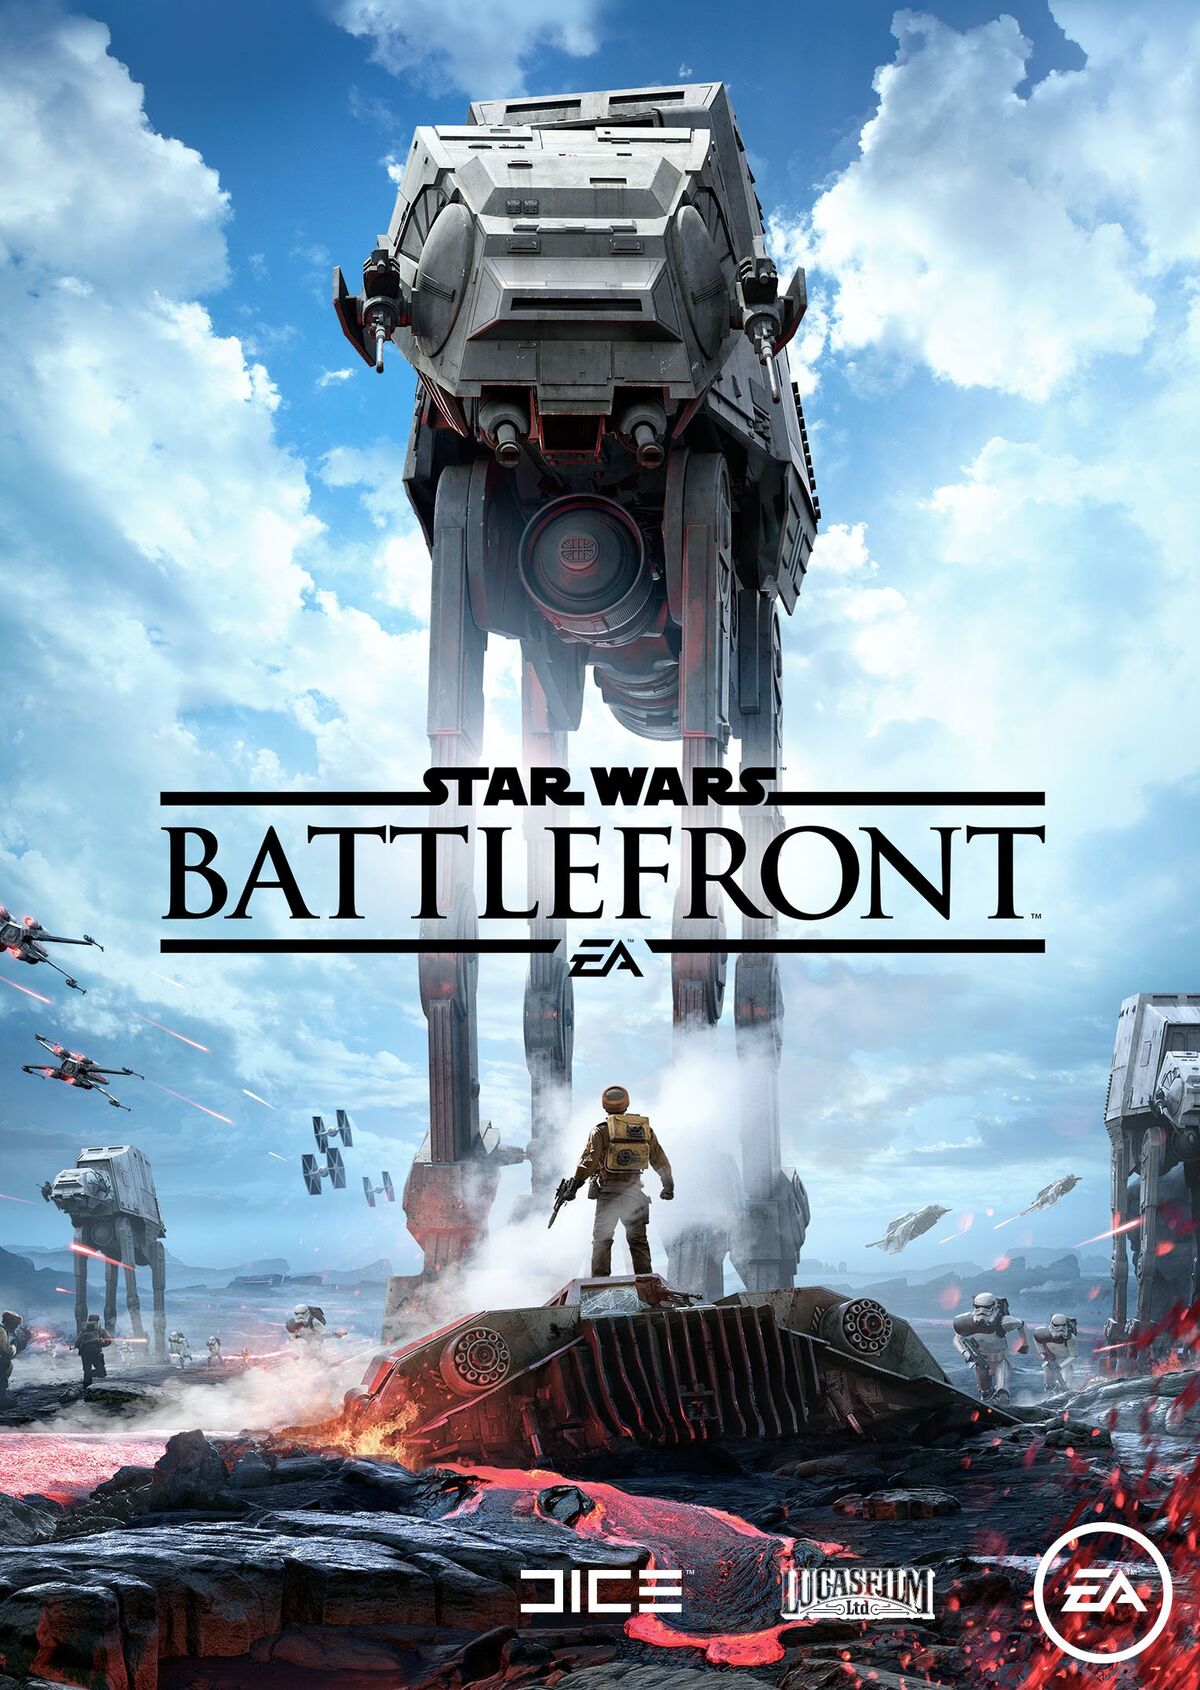 Star Wars Battlefront II With All Updates Free Download